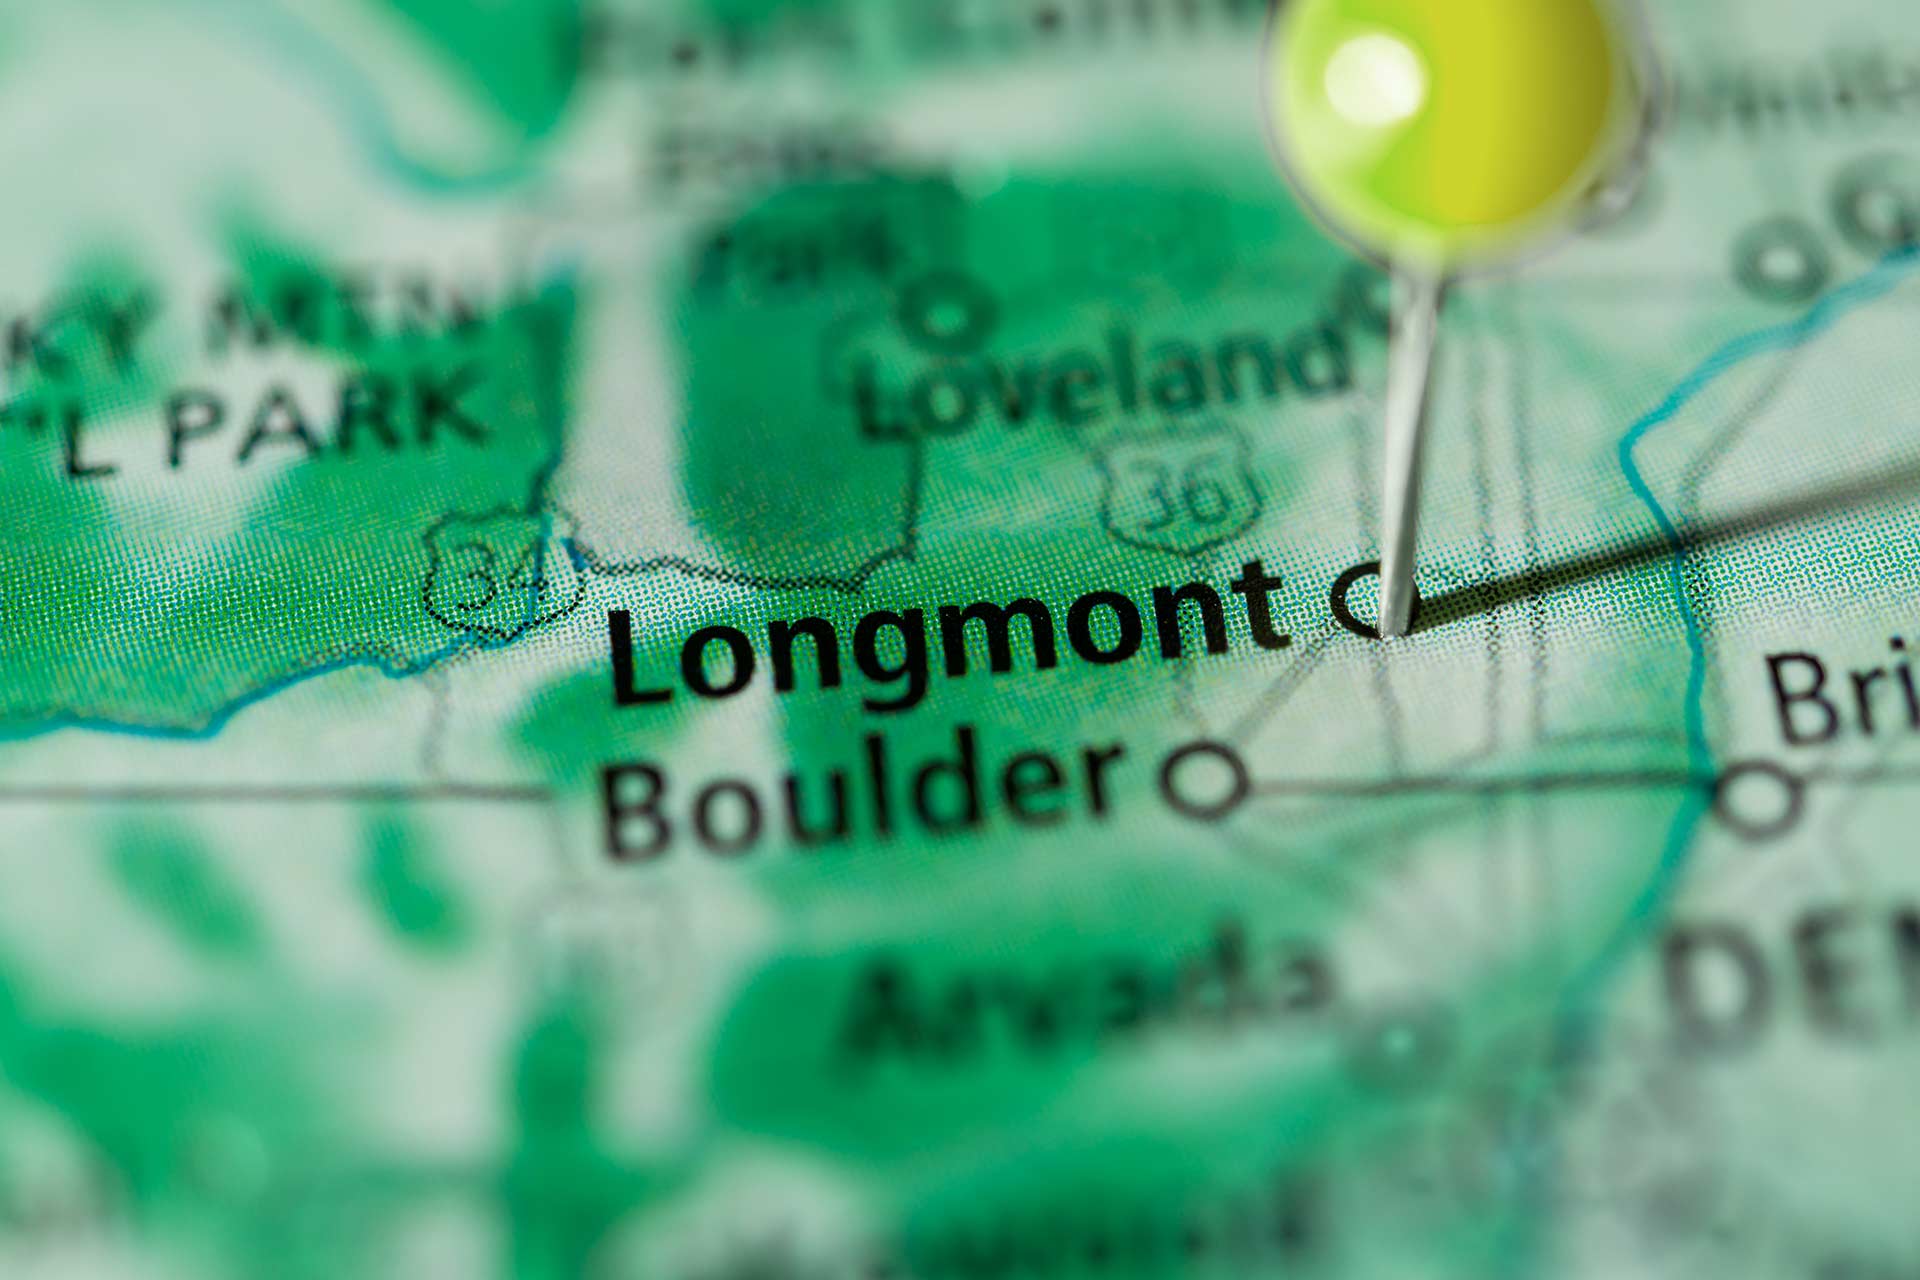 Lightshade hopes to obtain a dispensary license in Longmont